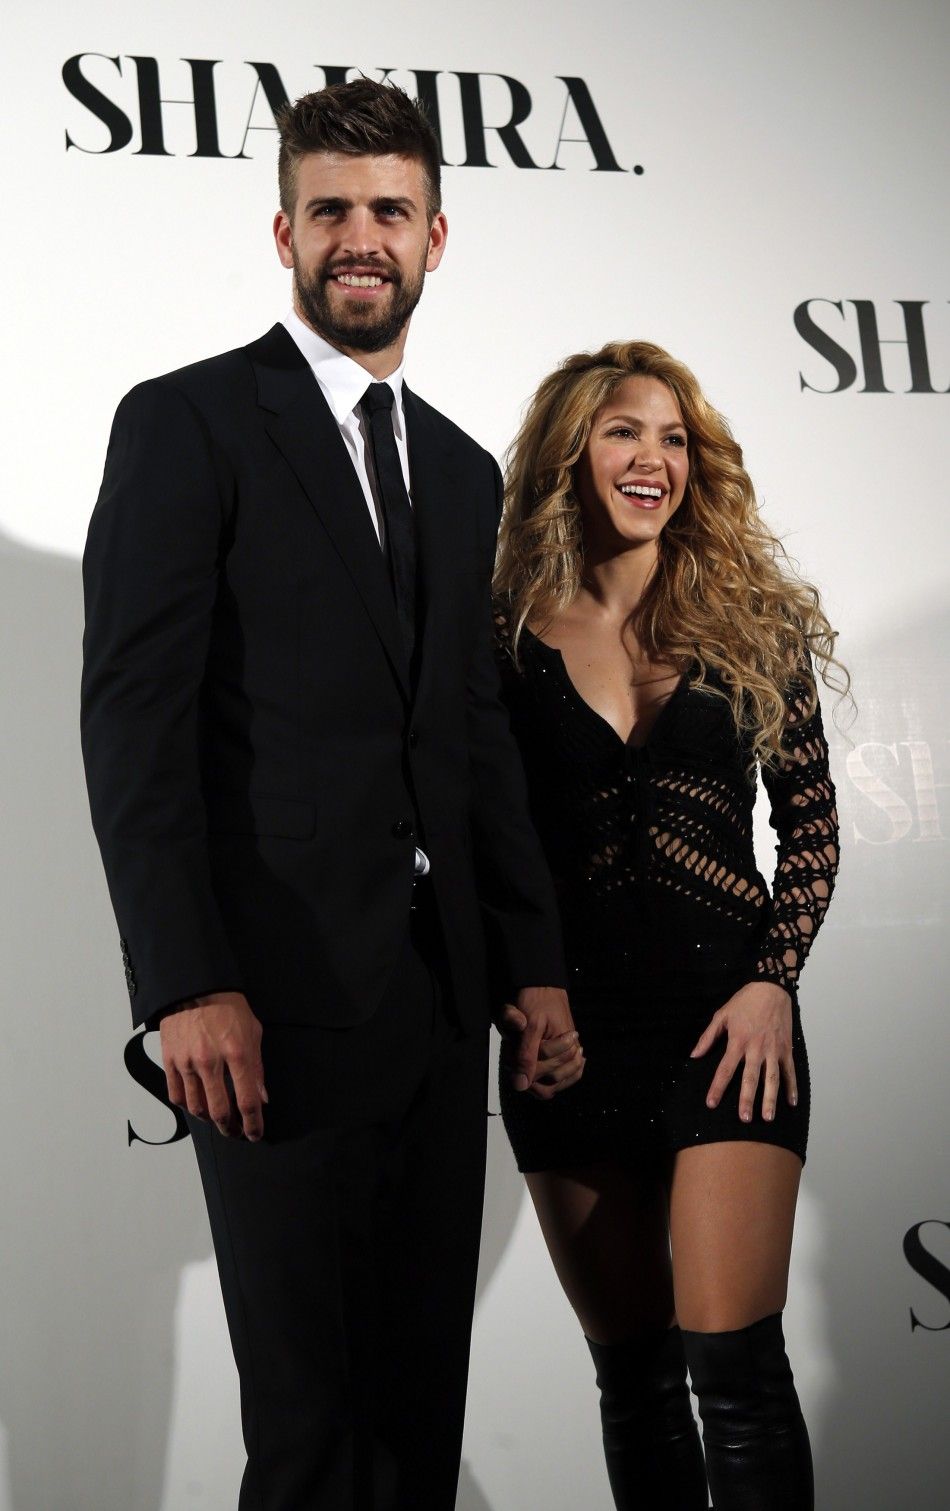 Colombian singer Shakira and Barcelonas soccer player Gerard Pique L pose during a photocall presenting her new album quotShakiraquot in Barcelona March 20, 2014. REUTERSAlbert Gea 